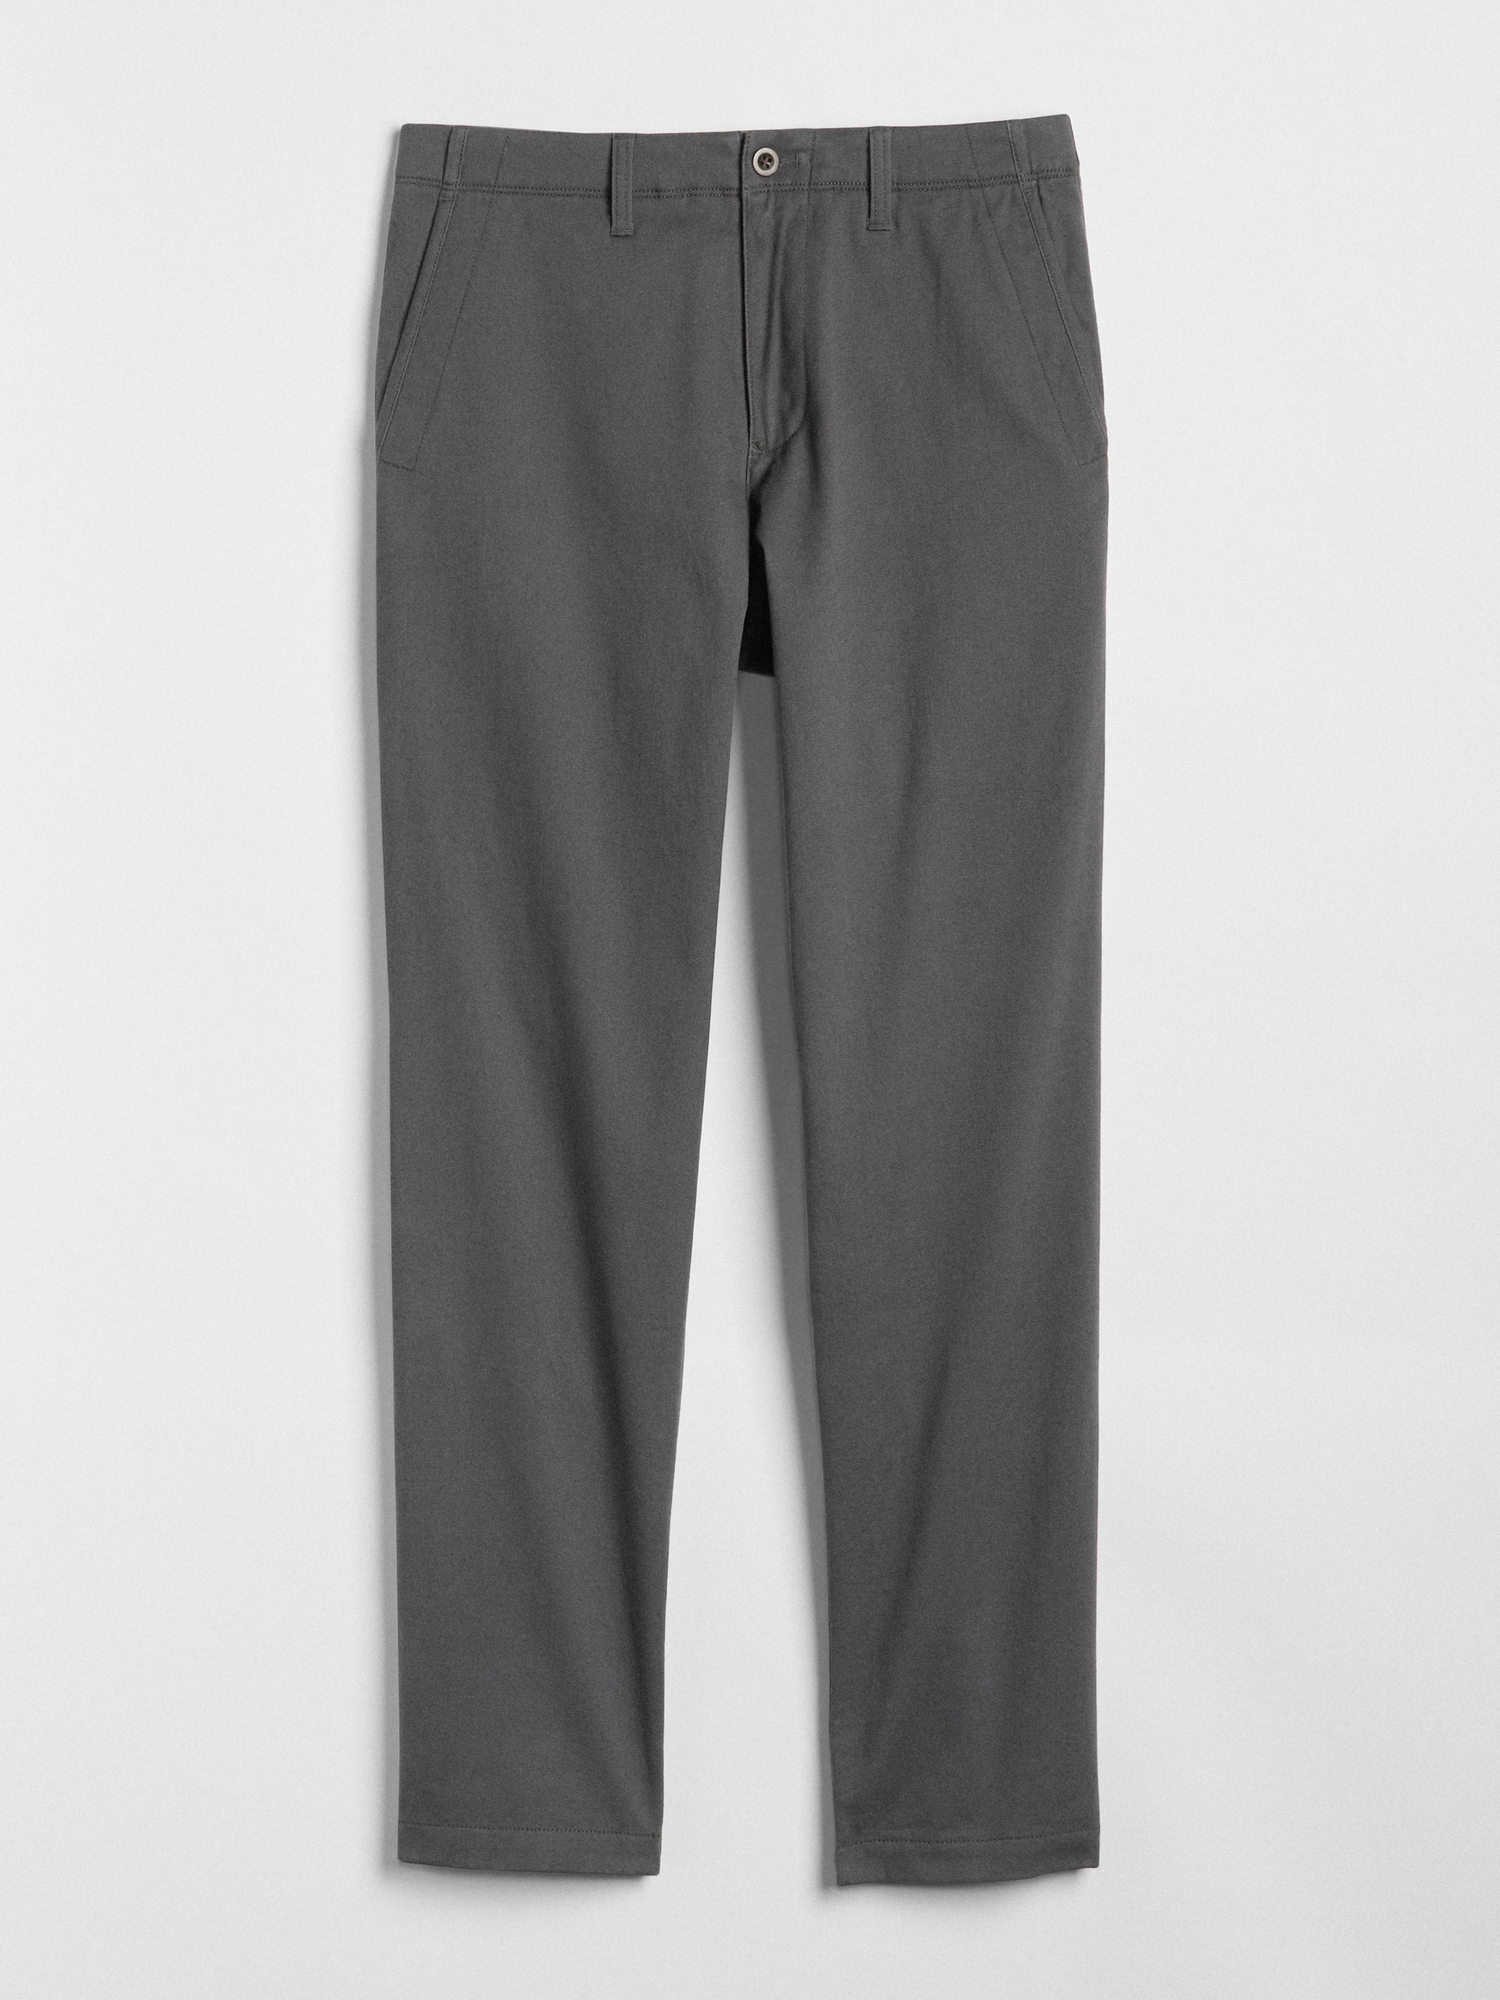 Soft Wear Khakis in Straight Fit with GapFlex